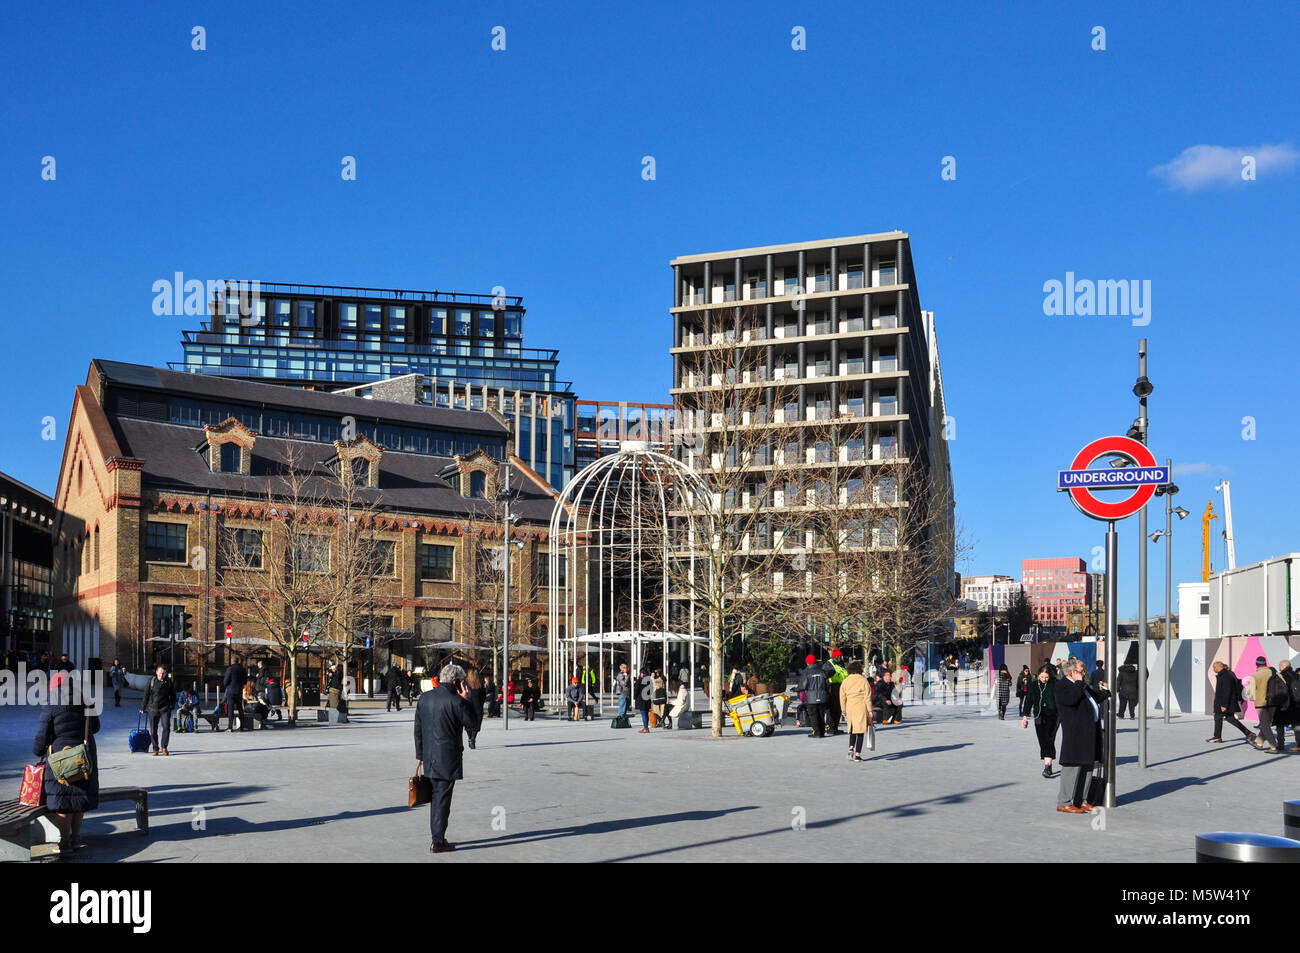 Newly redeveloped area of Battle Bridge Place and King's Boulevard, between King's Cross and St Pancras railway stations, London, England, UK Stock Photo